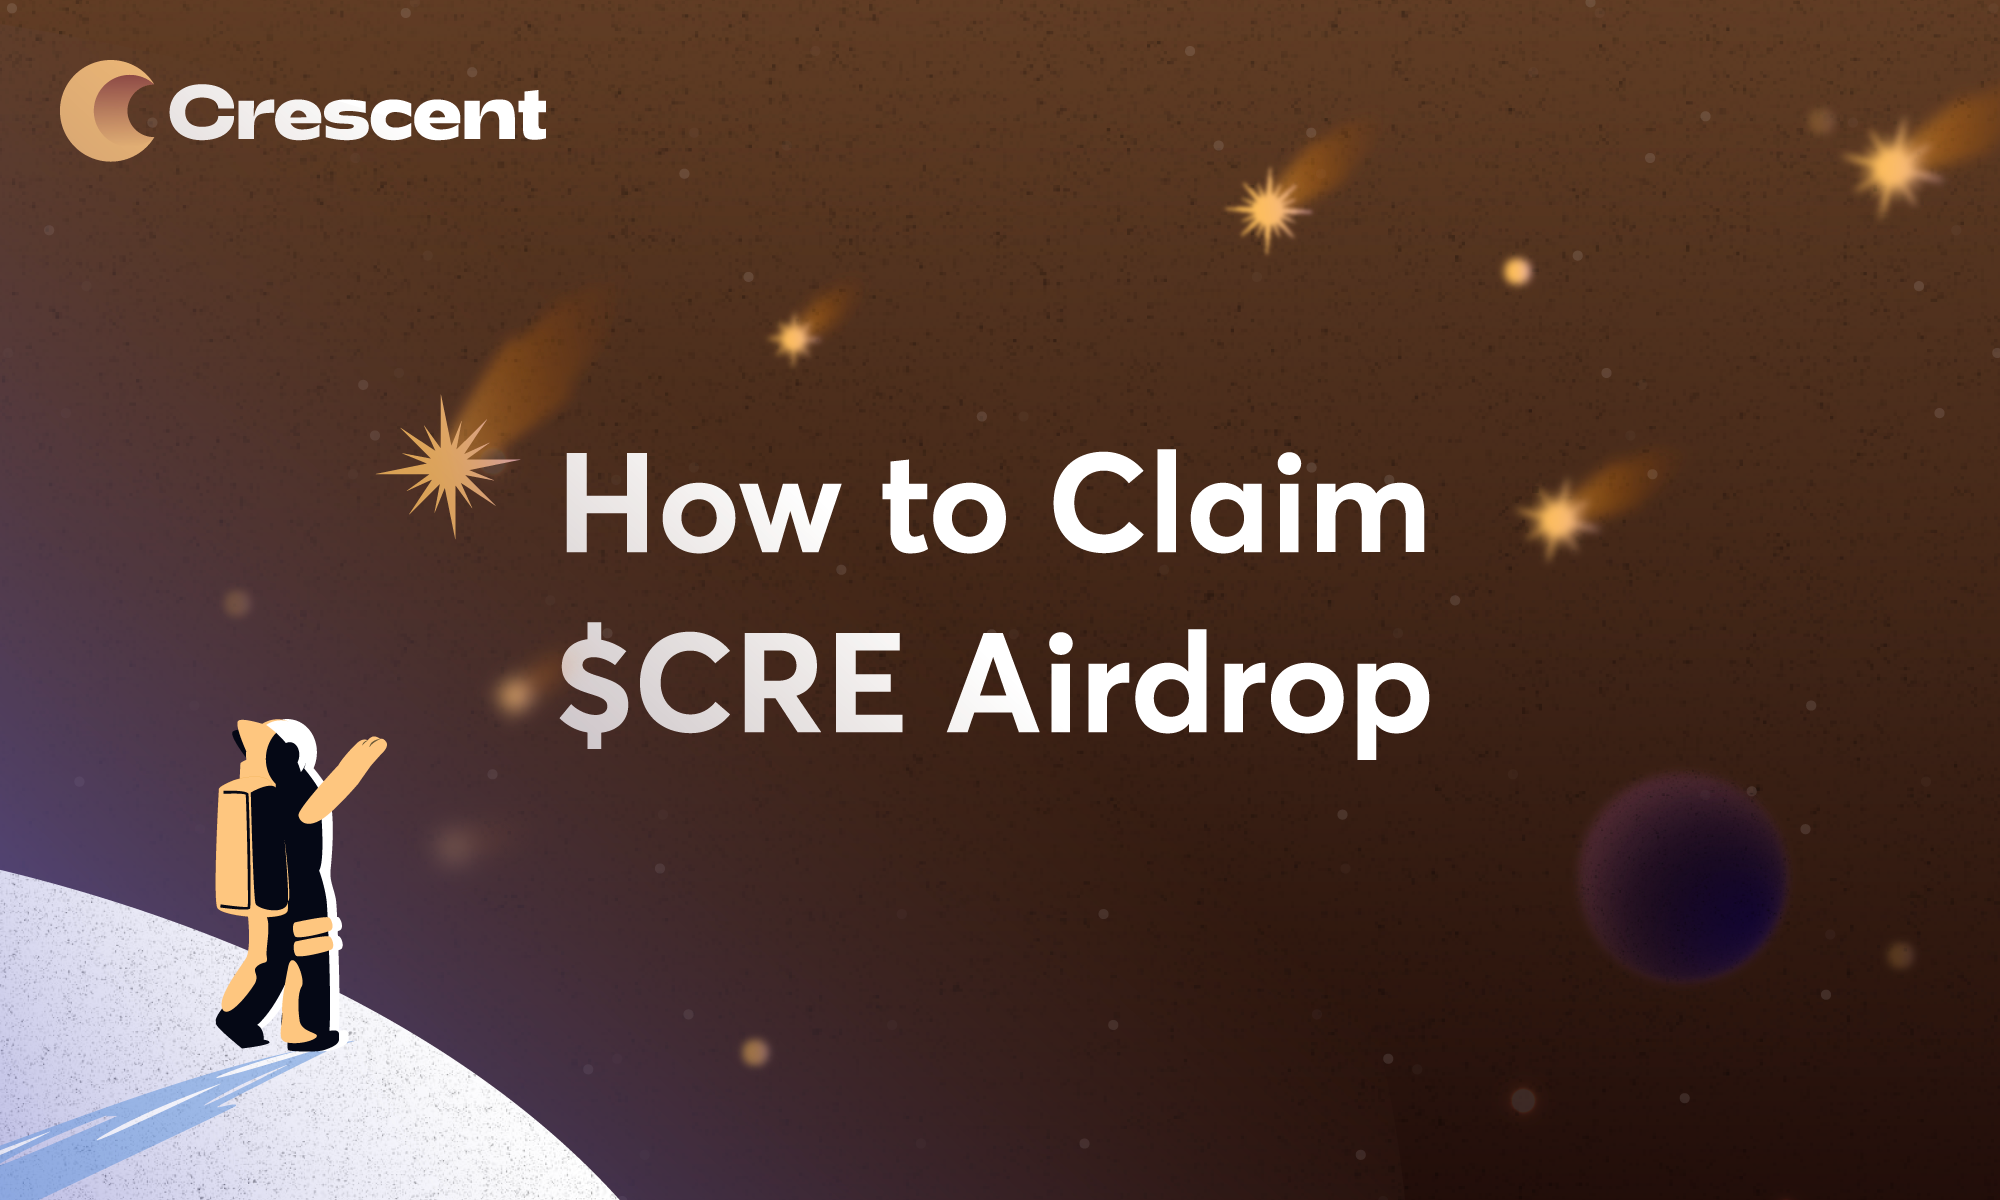 How to Claim $CRE Airdrop